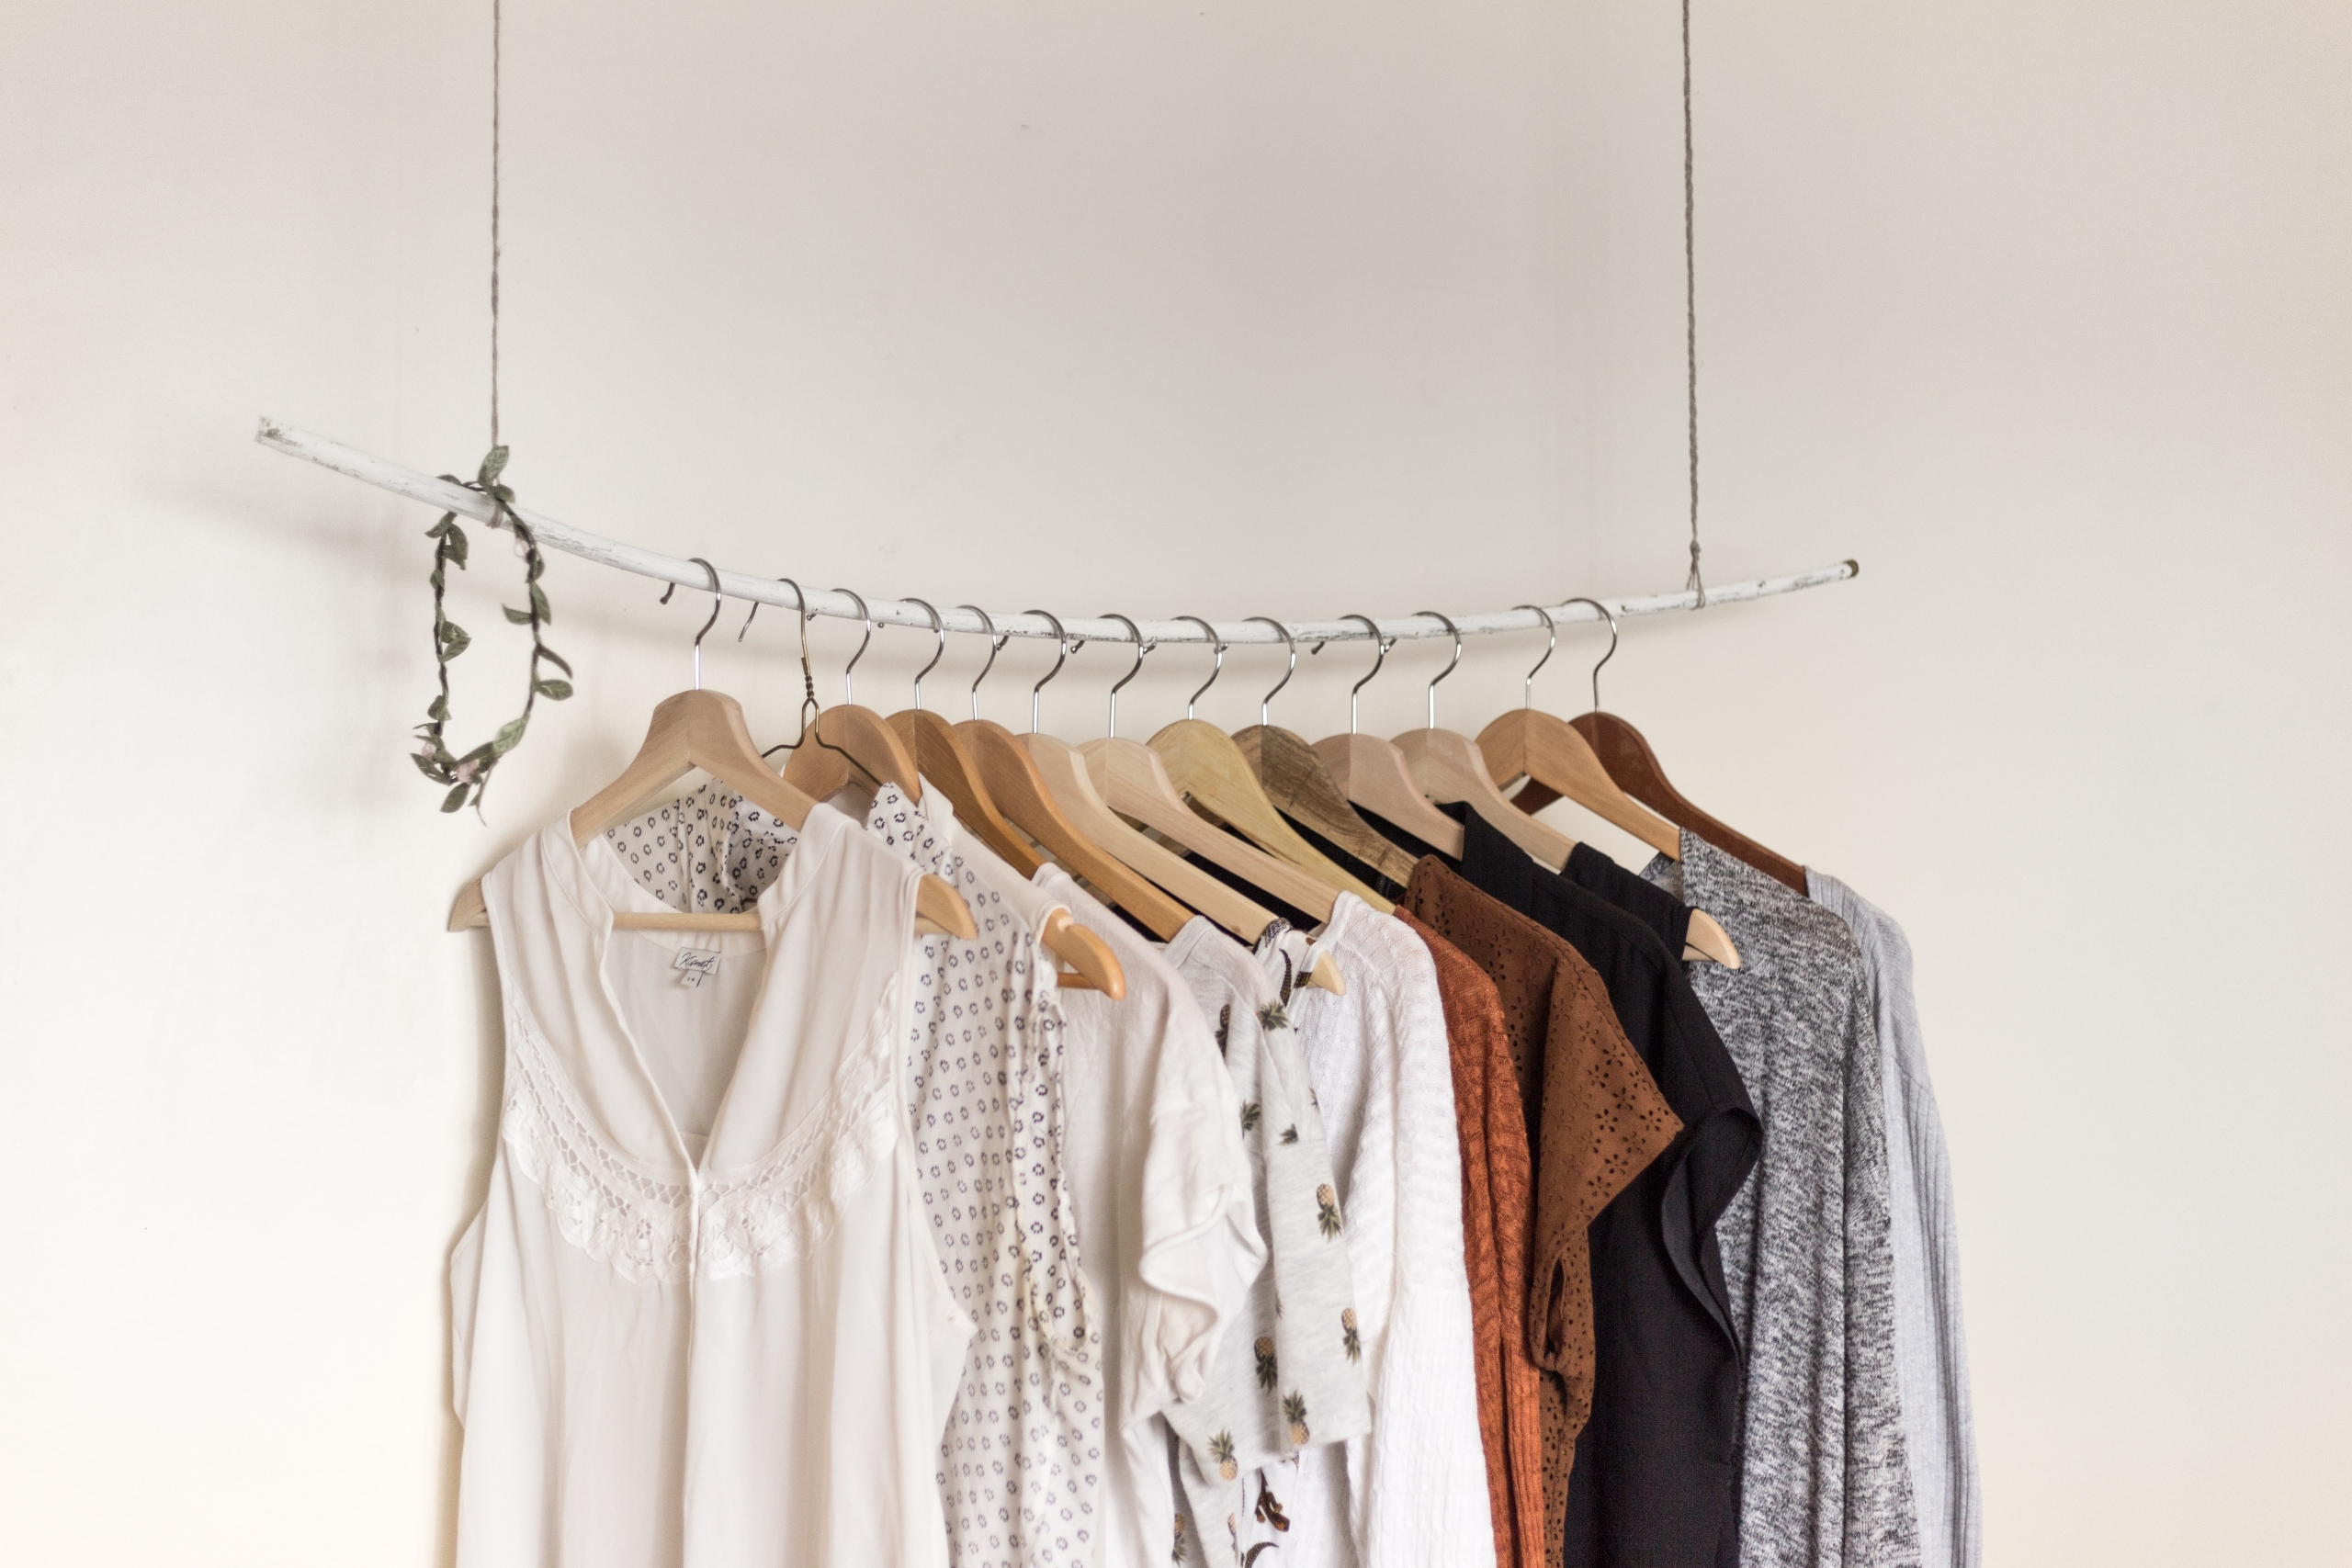 Basic clothes in women’s closet, or basic clothing